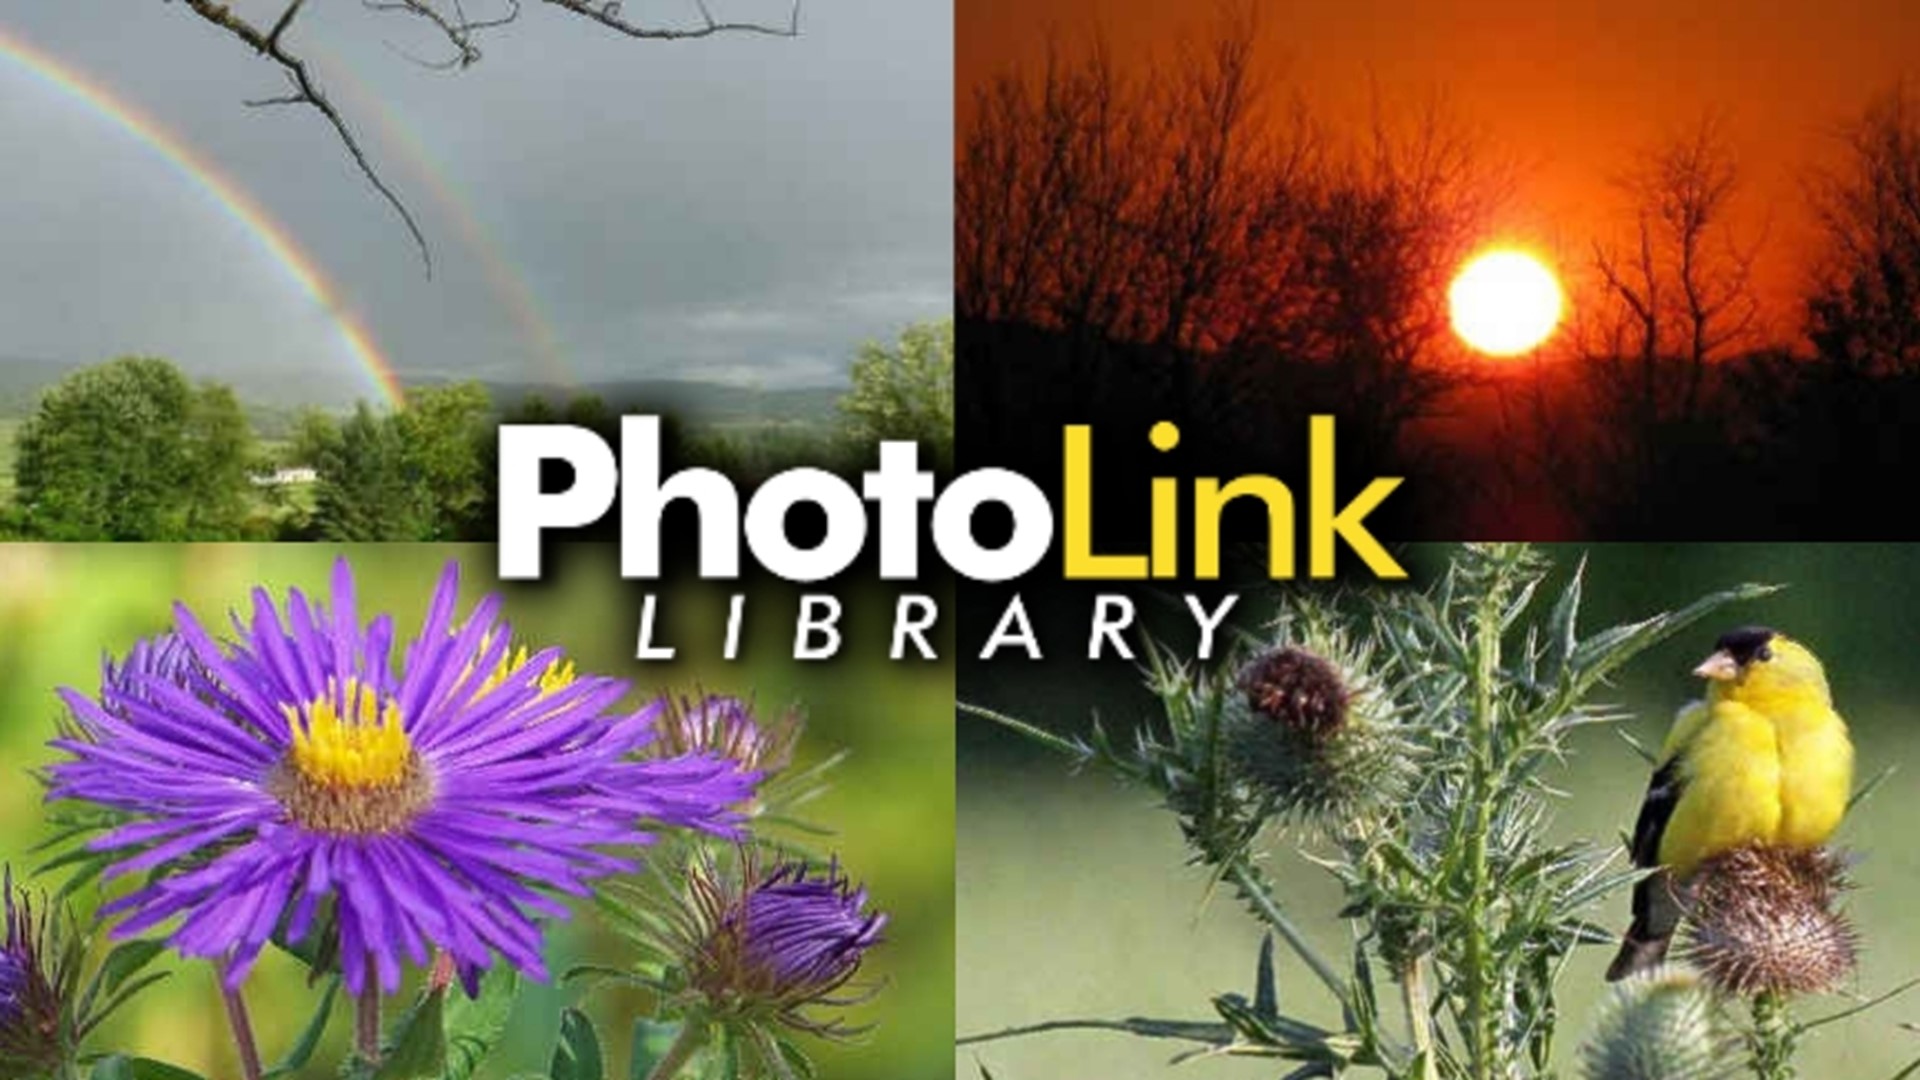 A good picture can be had day or night. See it, capture it, send it on into the PhotoLink Library.